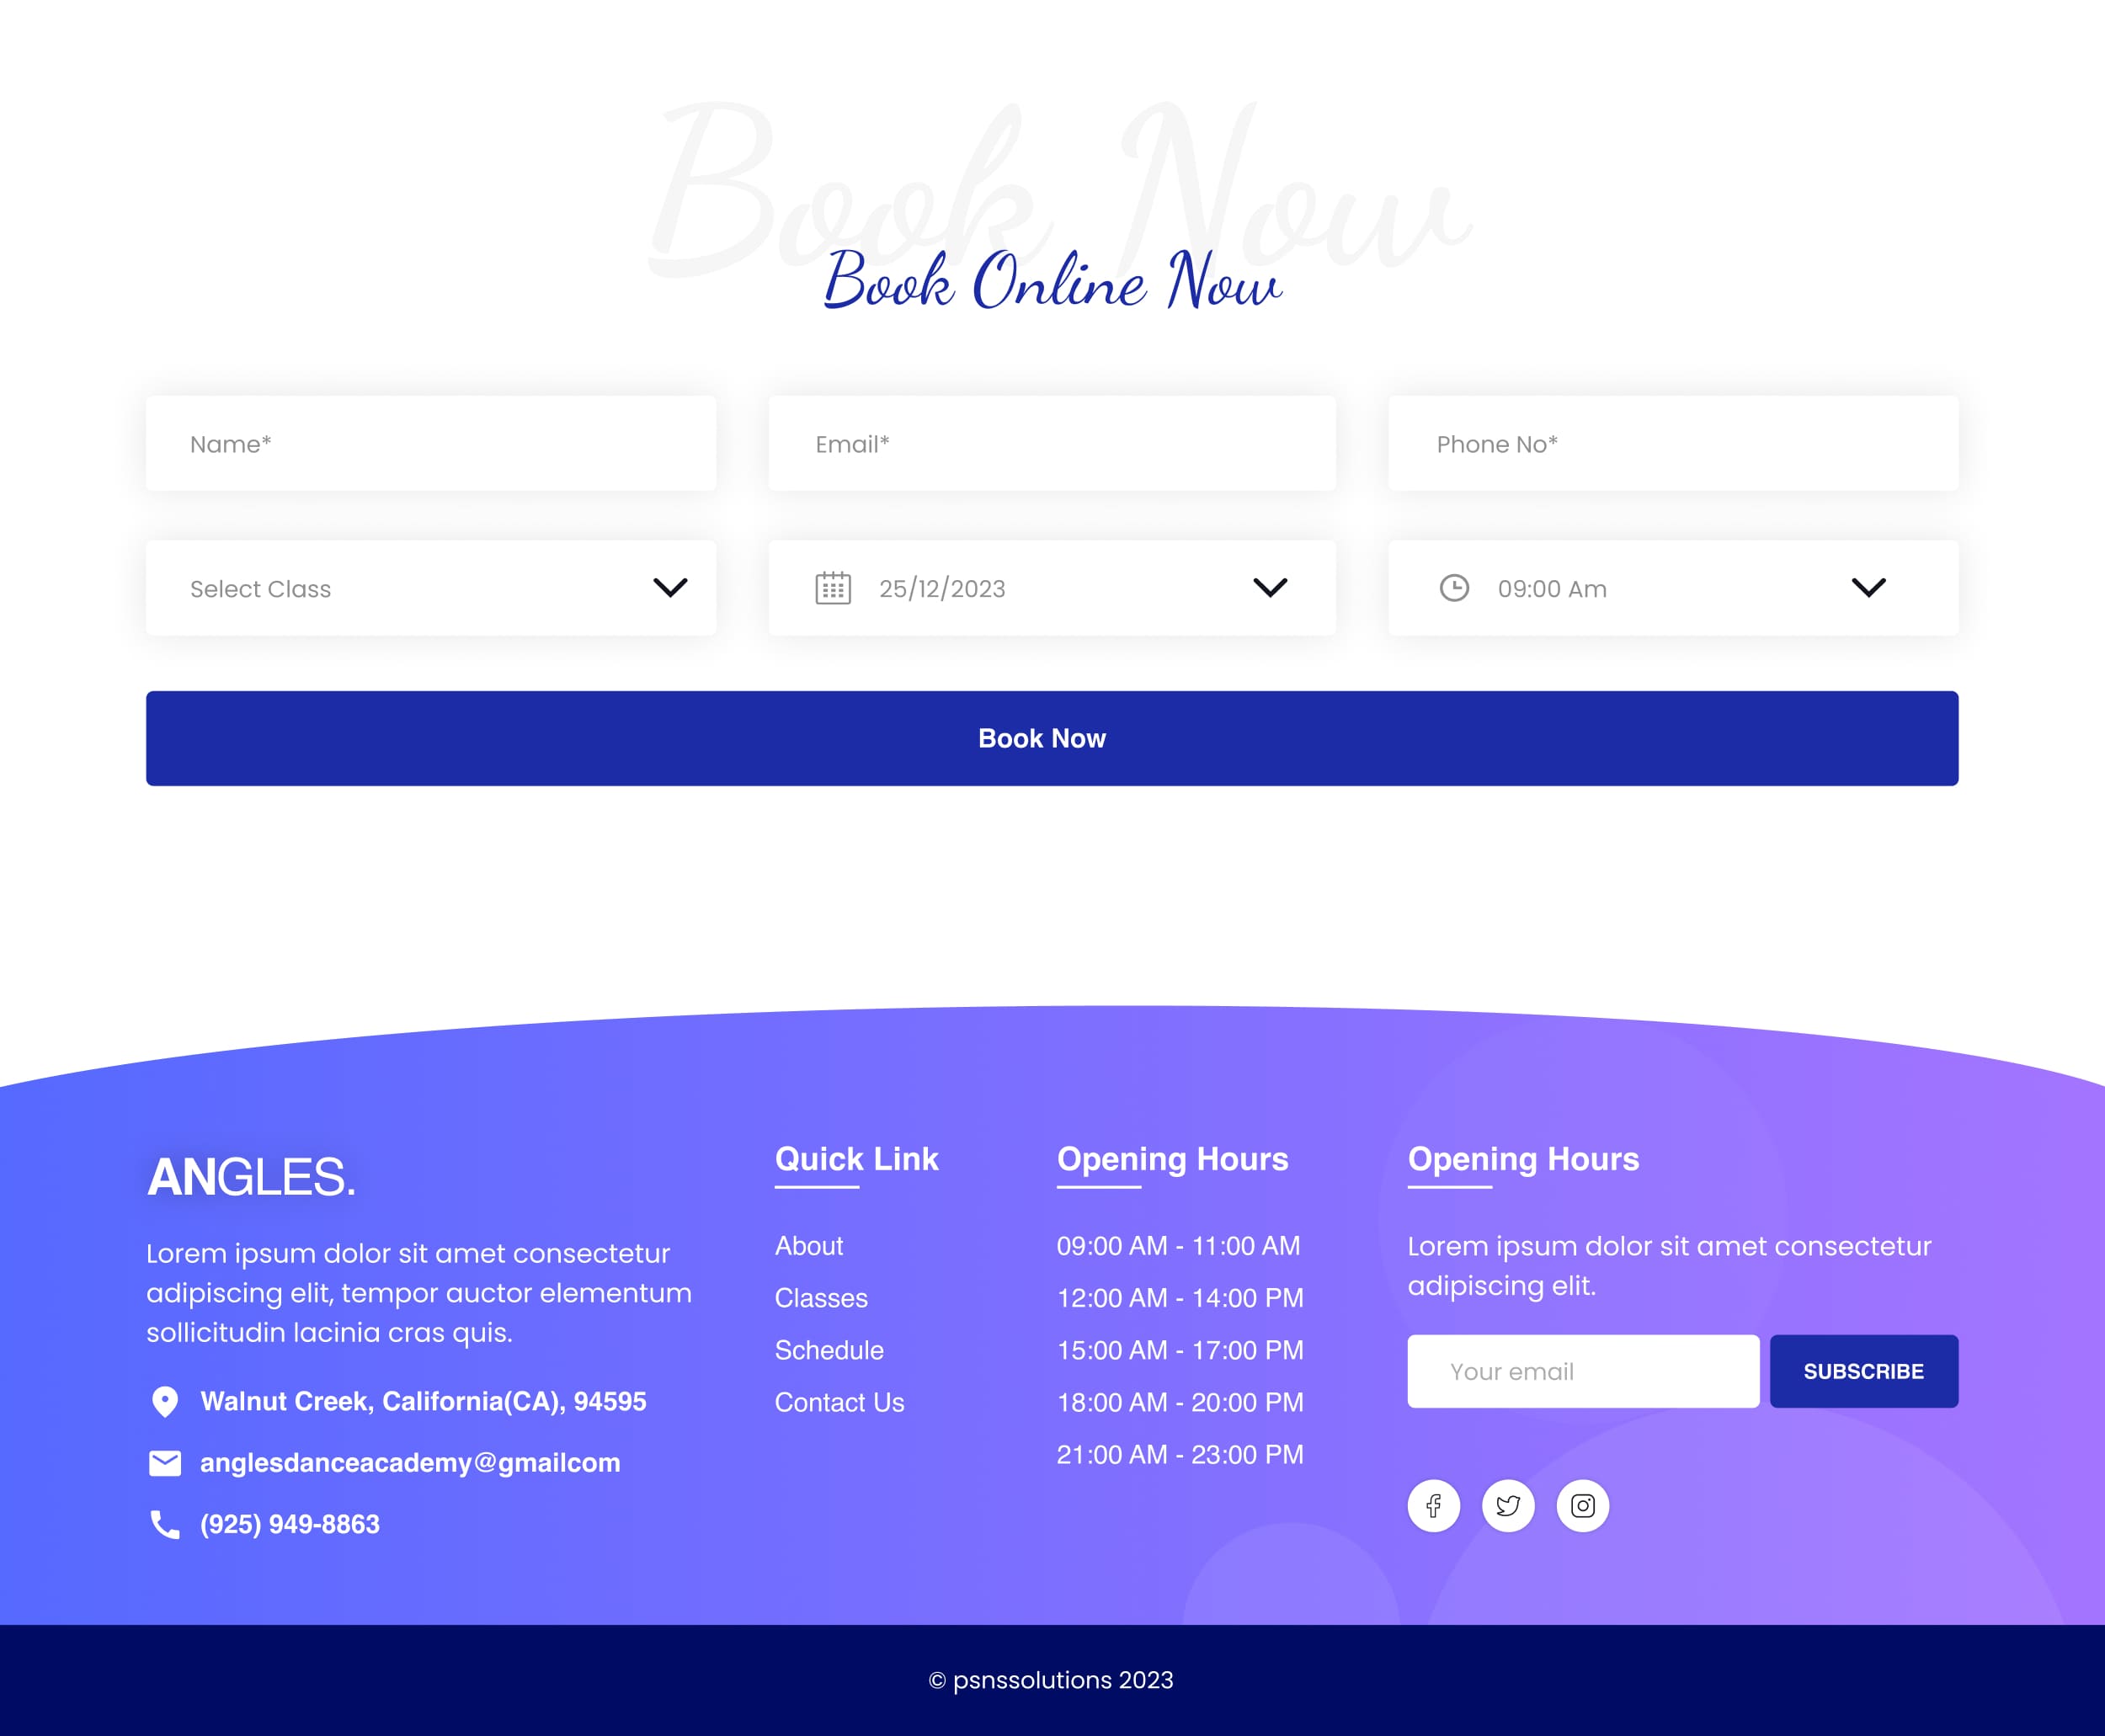 Booking Form and Footer